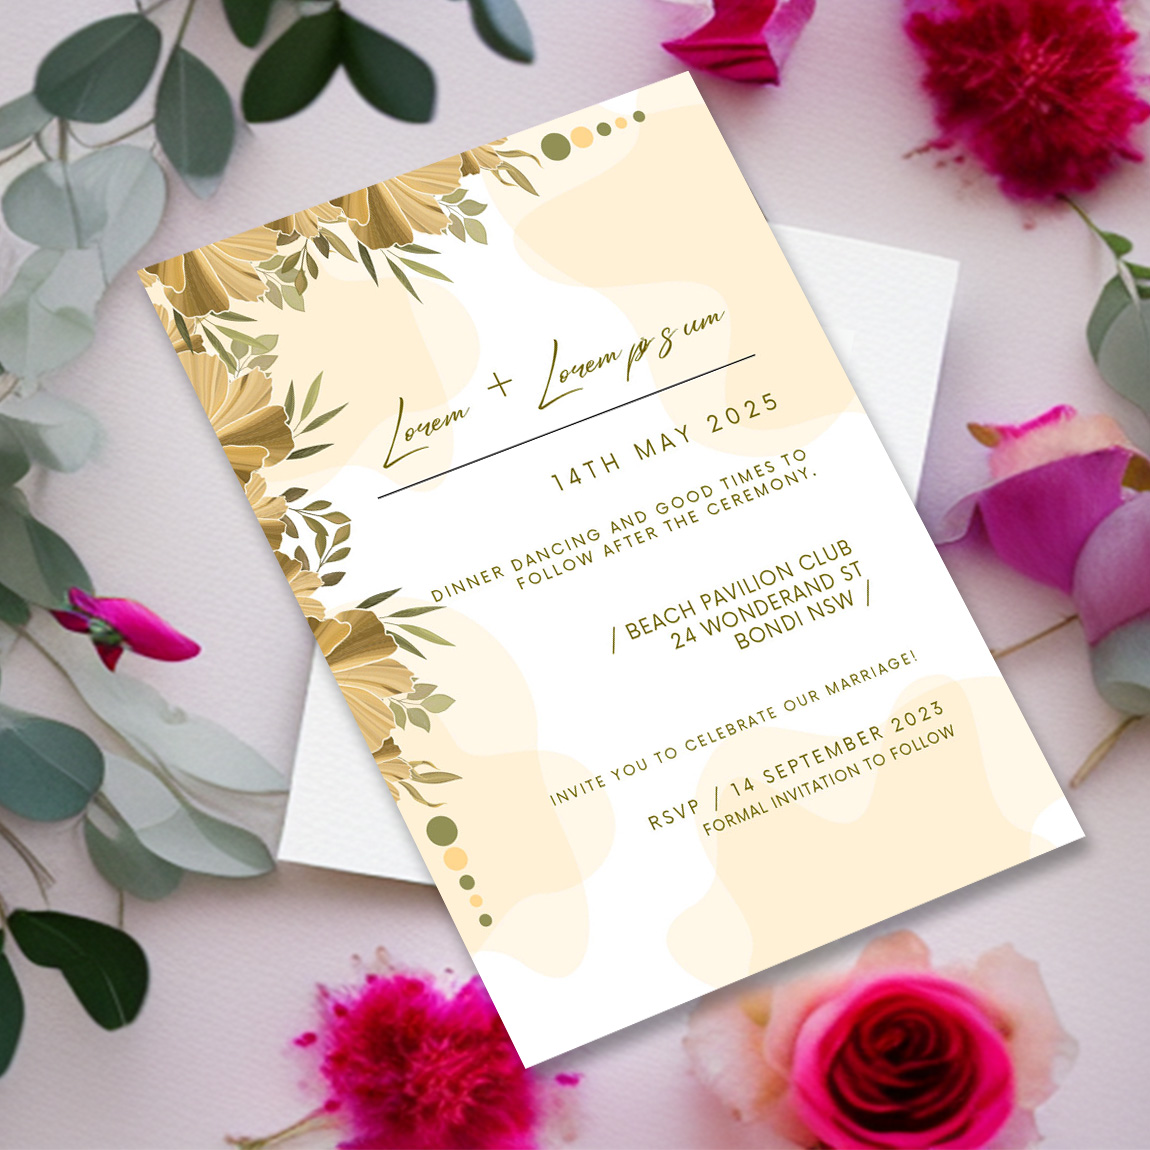 Image with amazing wedding invitation in pastel colors and flowers.